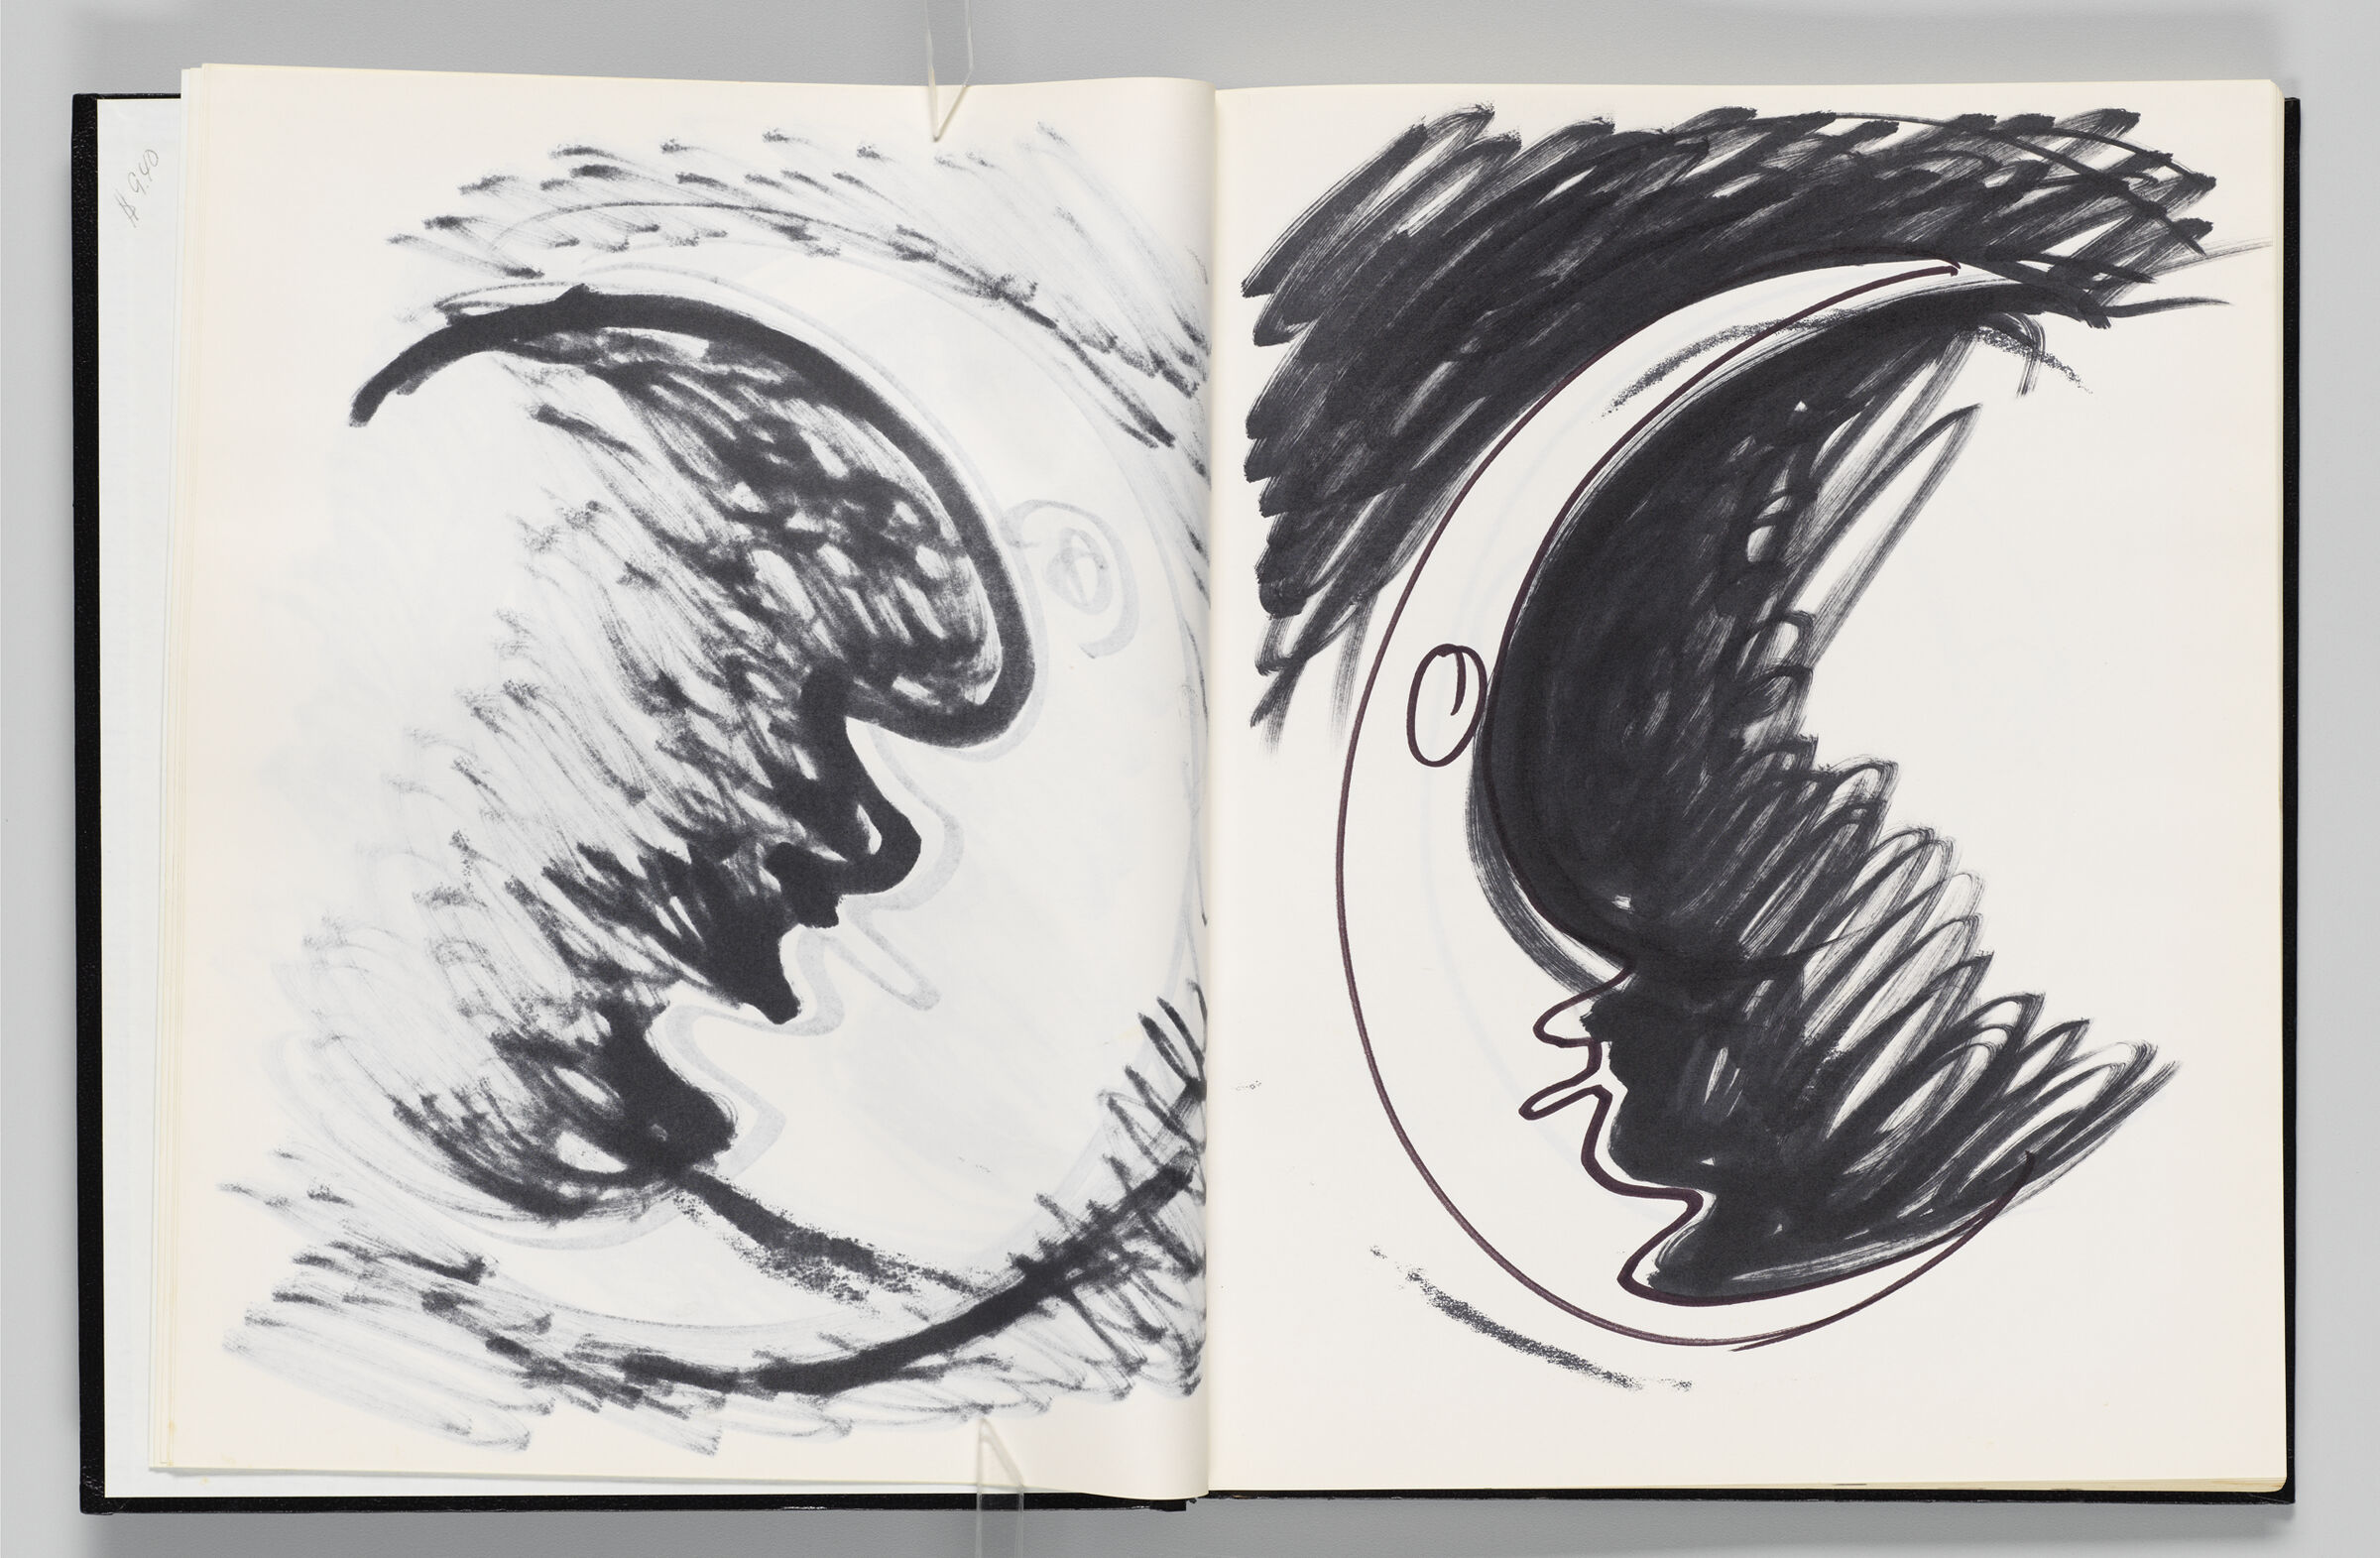 Untitled (Bleed-Through Of Previous Page, Left Page); Untitled (Crescent Moon Face, Right Page)